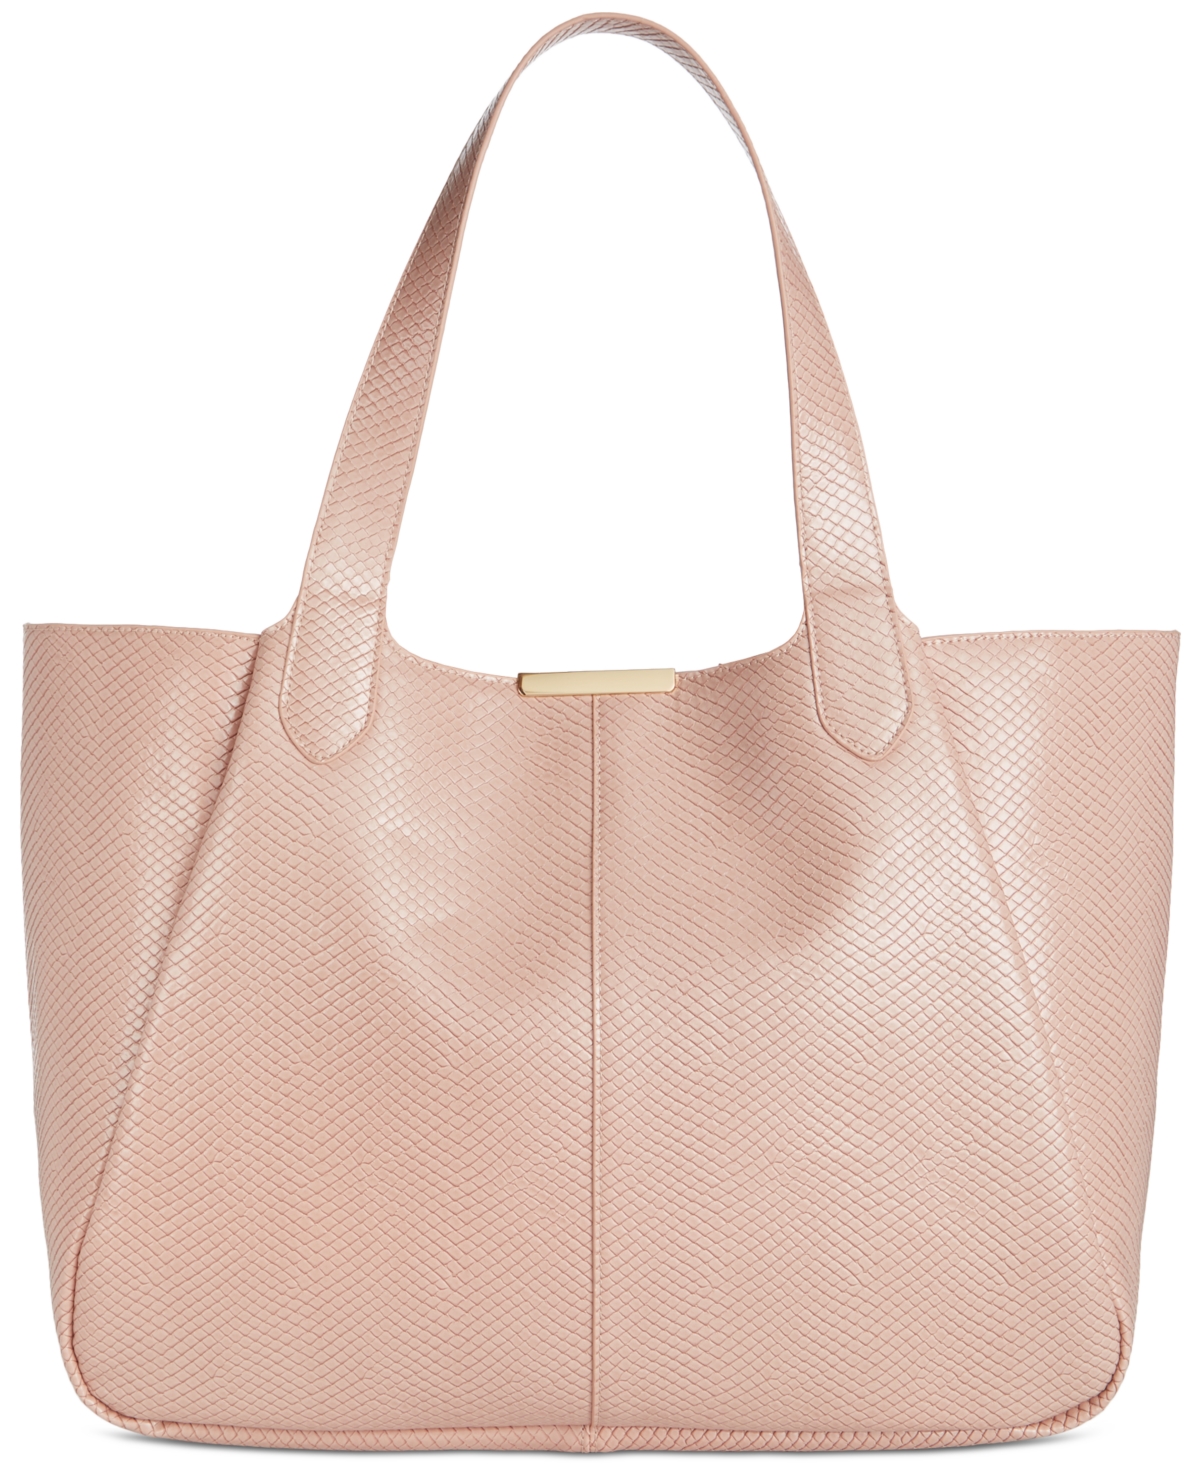 Azriell Embossed Tote Bag, Created for Macy's - Chai Snake